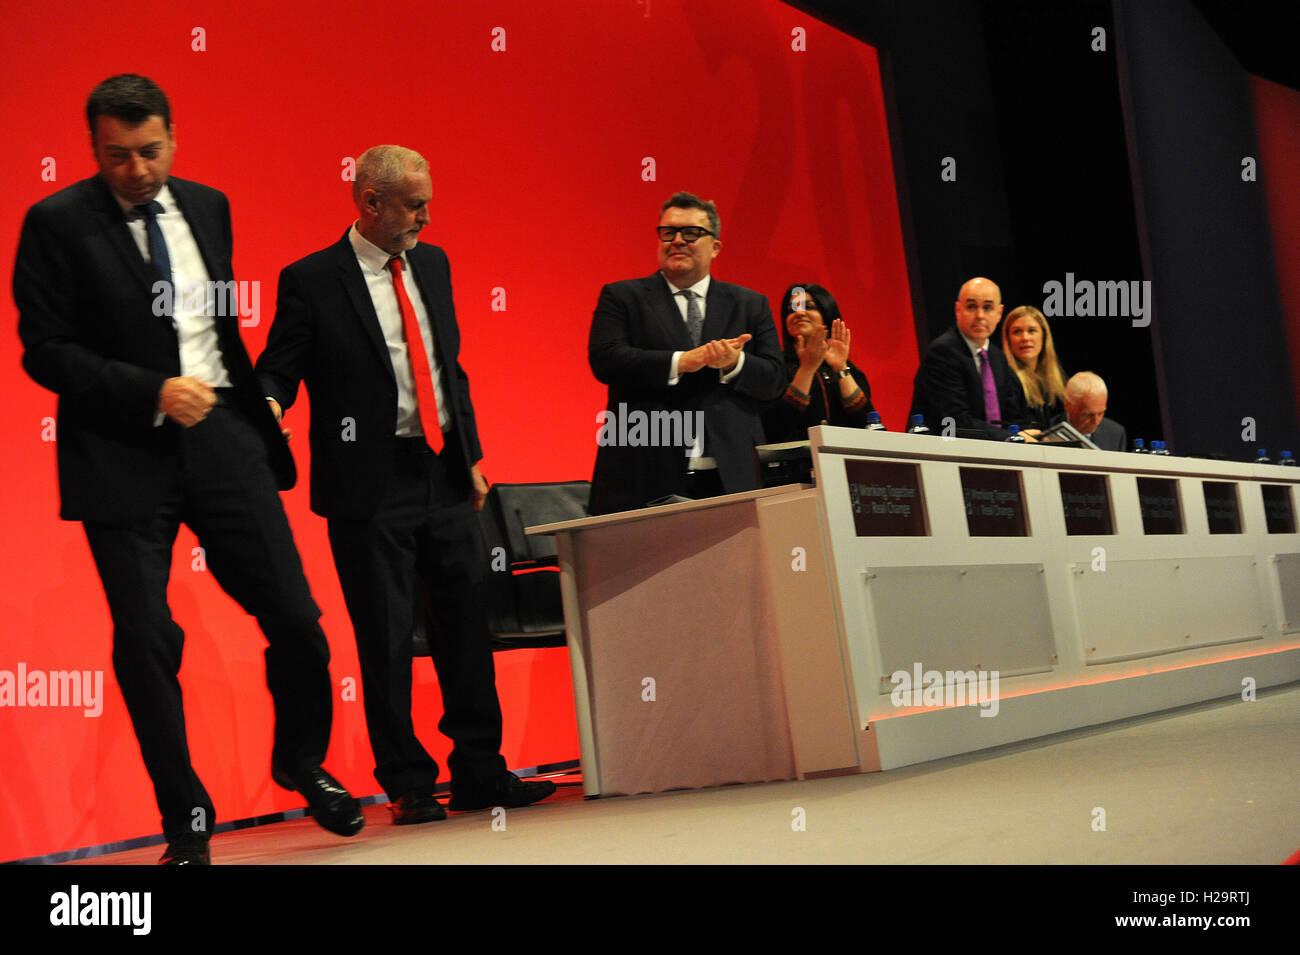 Liverpool, England. 25th September, 2016.  Ian McNicol (L), party general secretary, leaves the stage having shaken hands with Labour leader Jeremy Corbyn (2nd L),  during the first day of the Labour Party annual conference at the ACC Conference Centre. On the morning of the first day of the conference there will be reports from the general secretary, the national policy forum and on digital and party organisation. This conference is following Jeremy CorbynÕs re-election as labour party leader after nine weeks of campaigning against fellow candidate, Owen Smith. This is his second leadership v Stock Photo